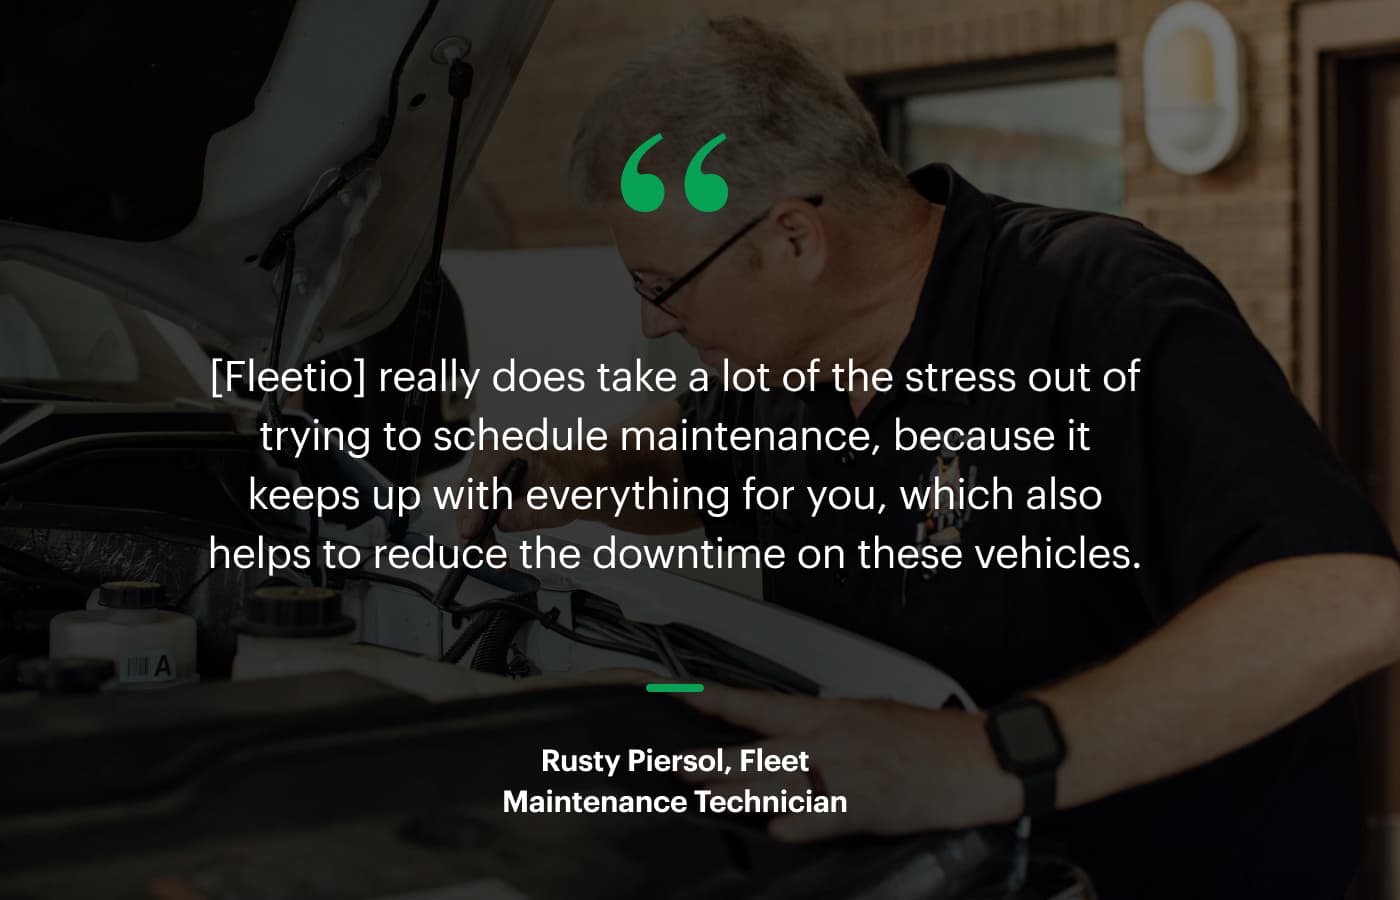 “[Fleetio] really does take a lot of the stress out of trying to schedule maintenance, because it keeps up with everything for you, which also helps to reduce the downtime on these vehicles.” – Rusty Piersol, Fleet Maintenance Technician